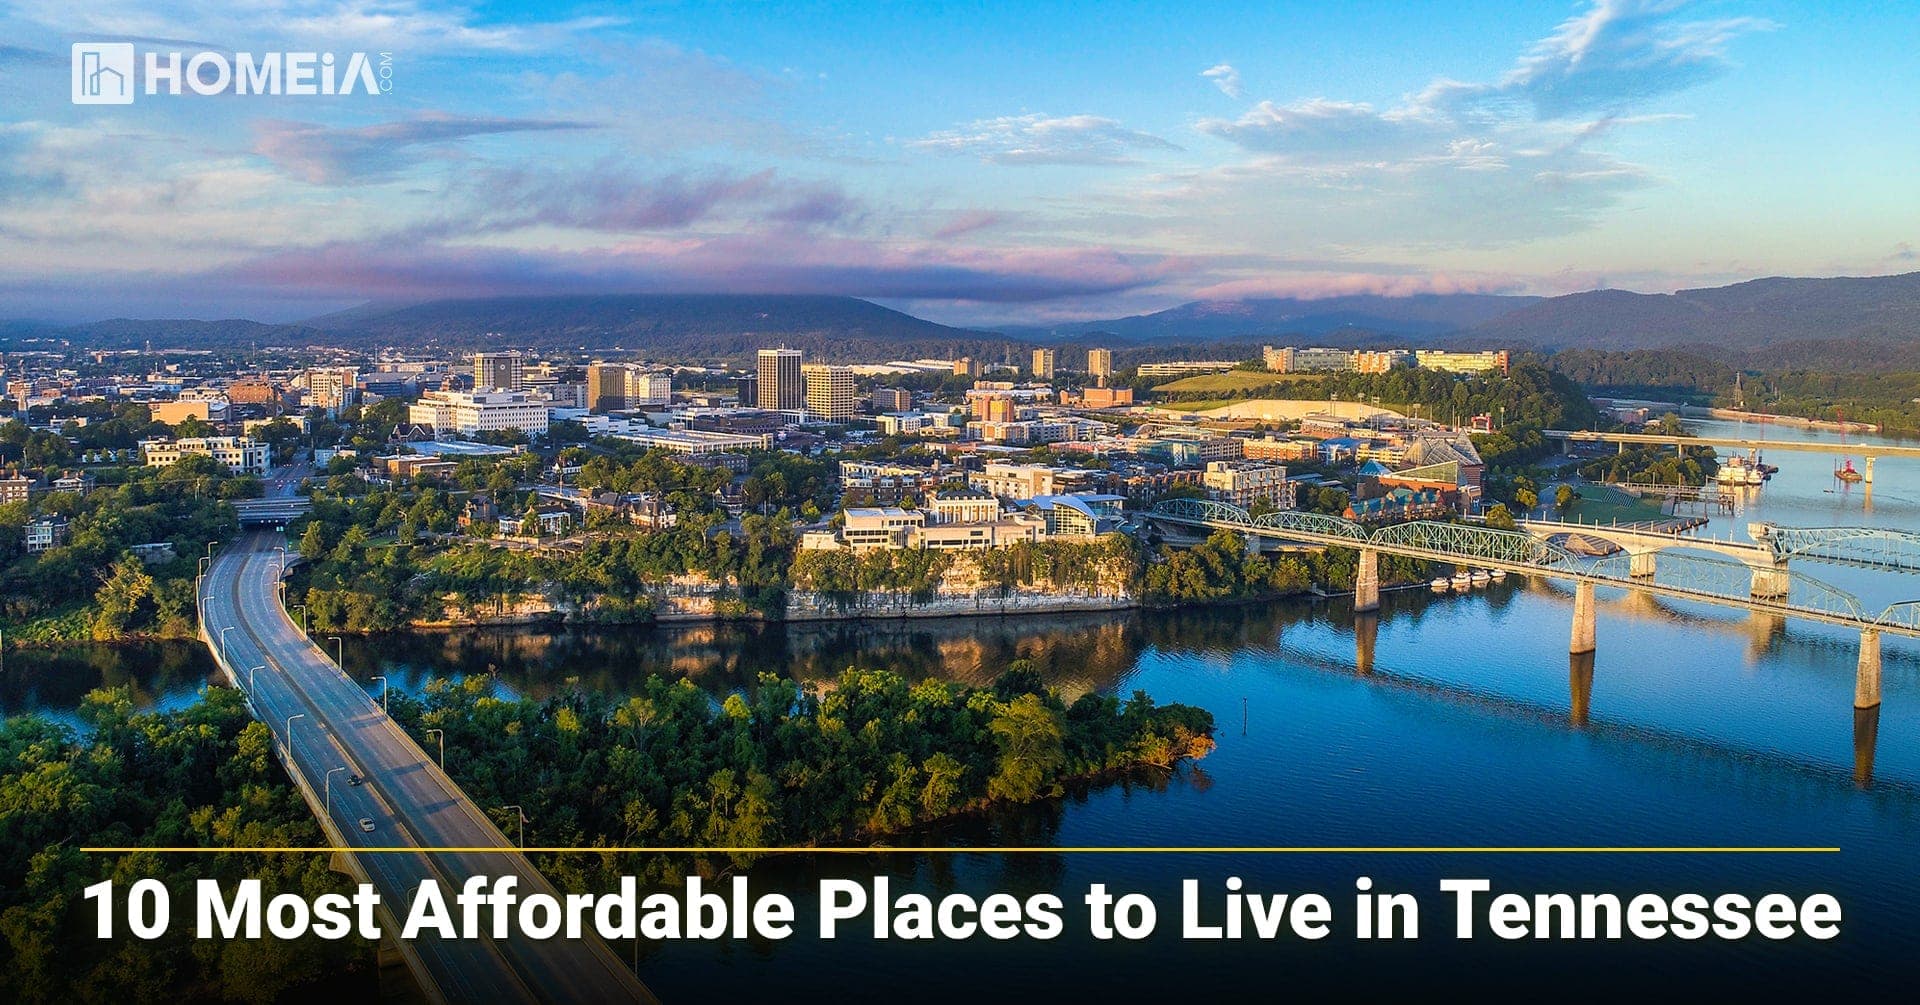 10 Most Affordable Places to Live in Tennessee